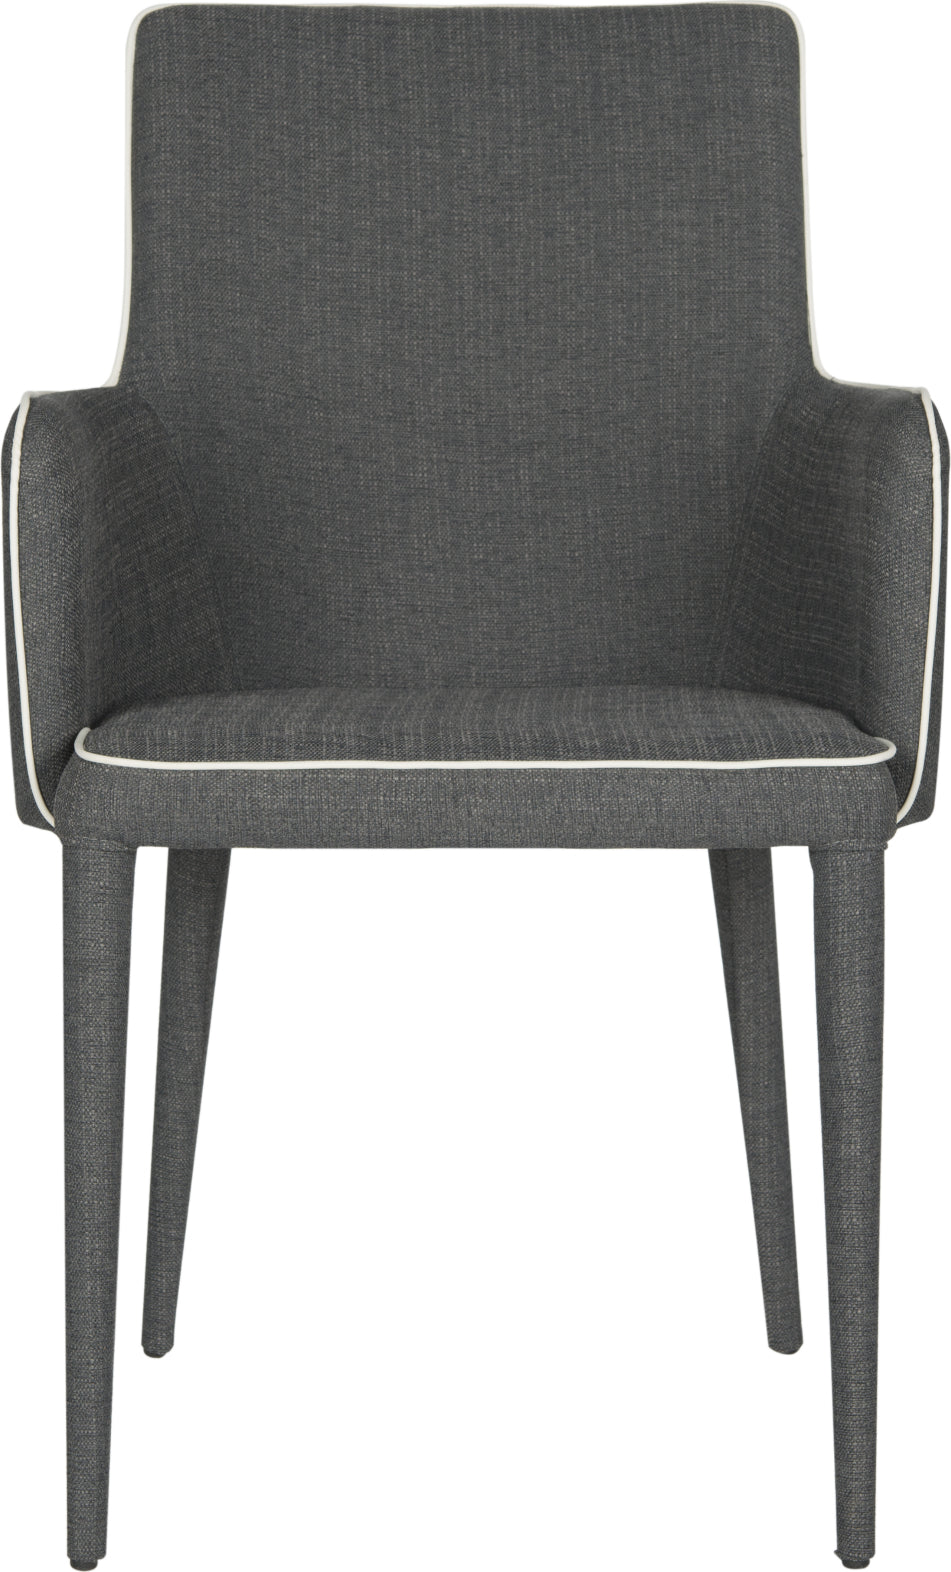 Safavieh Summerset Arm Chair Grey and White Furniture main image